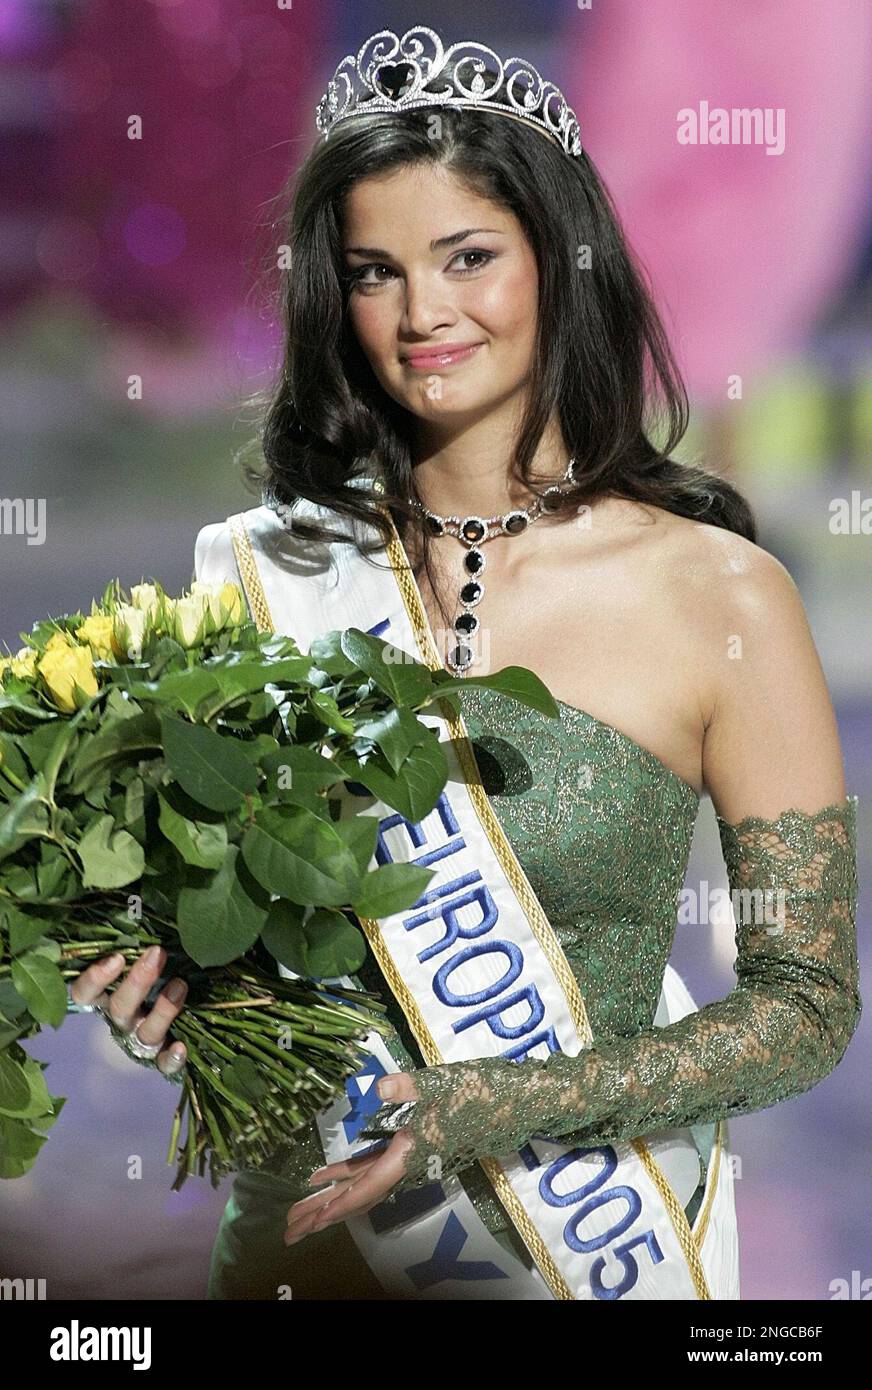 Miss Europe 2005 Shermine Shahrivar, 22, of Germany, smiles after she was announced the winner out of 36 contestants in Paris Saturday March 12, 2005. (AP Photo/Michel Euler) Stock Photo